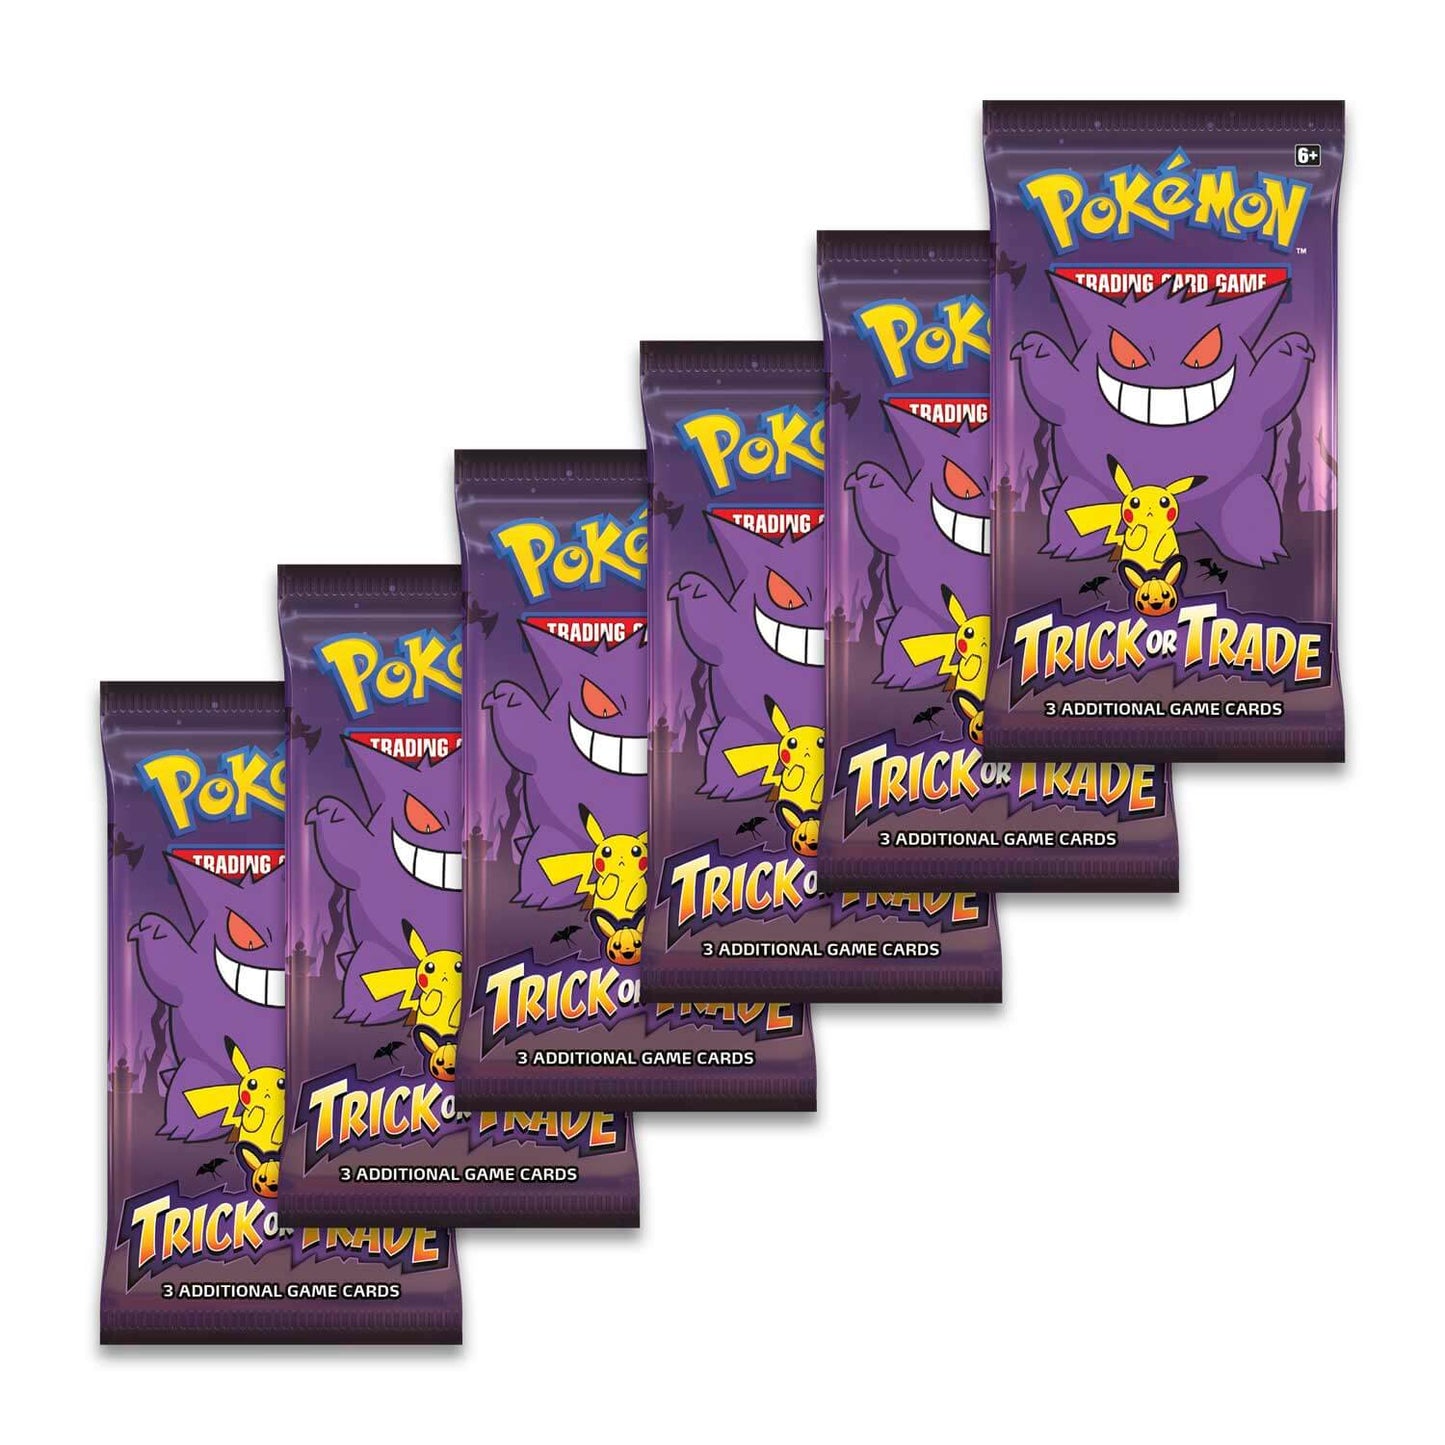 Pokemon TCG: Trick or Trade BOOster pack artwork featuring gengar